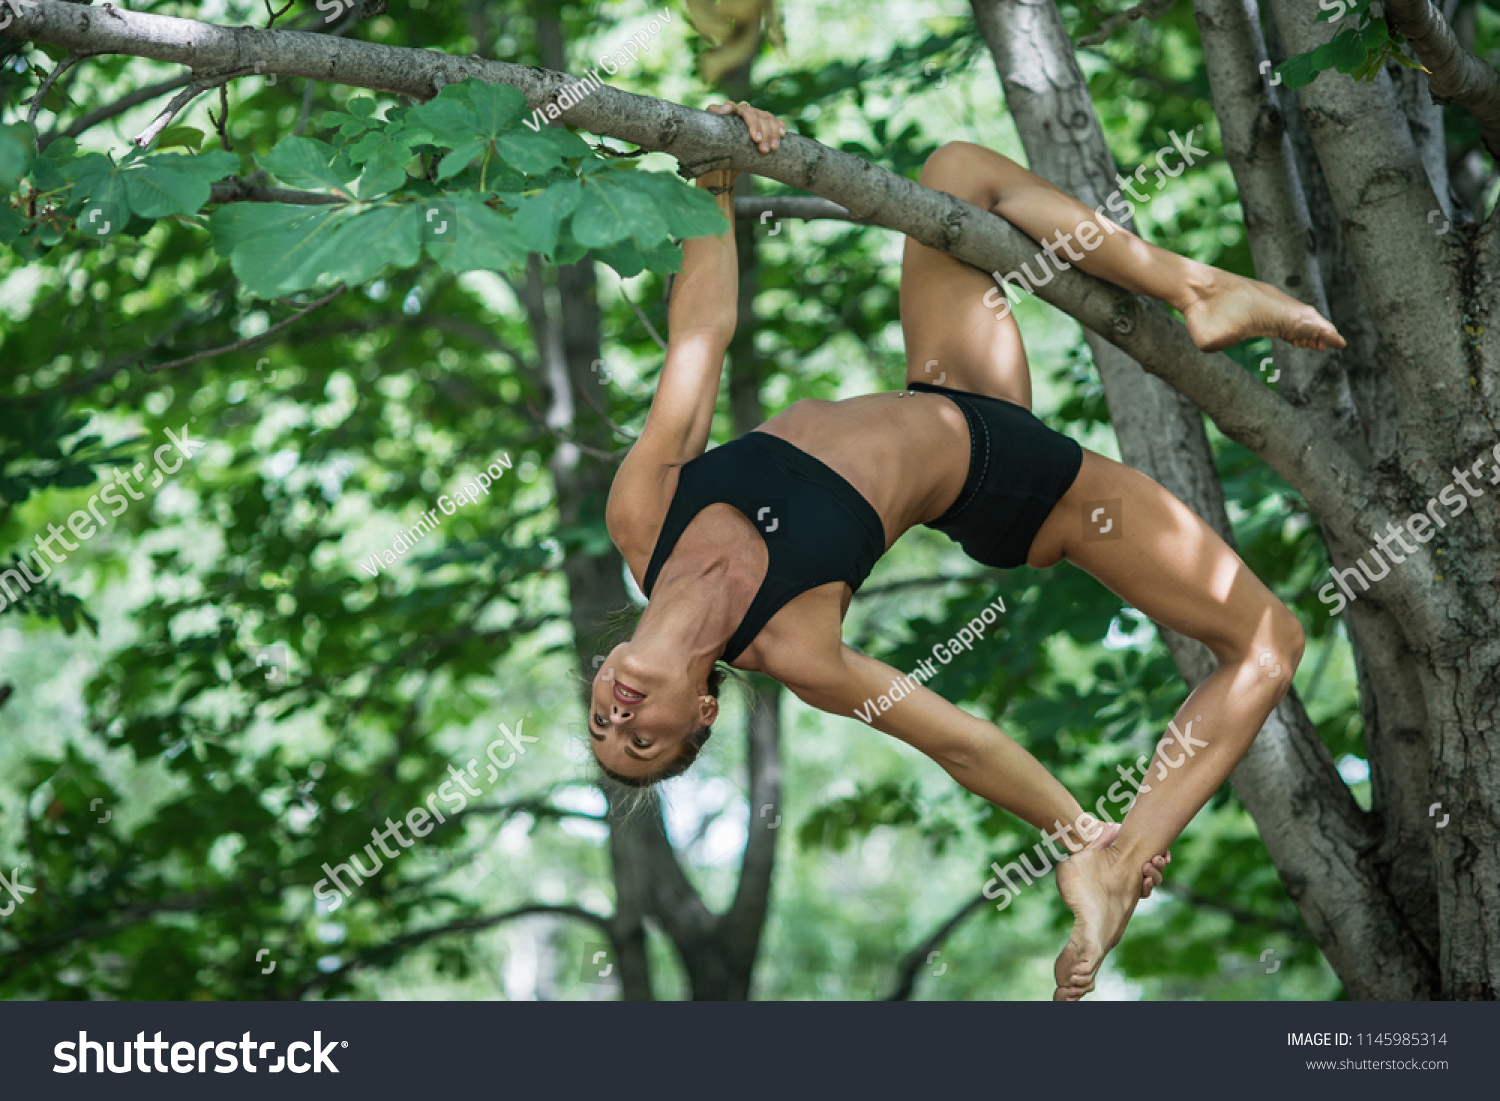 https://image.shutterstock.com/z/stock-photo-sports-girl-acrobat-performs-acrobatic-element-on-the-tree-woman-engaged-in-gymnastics-1145985314.jpg